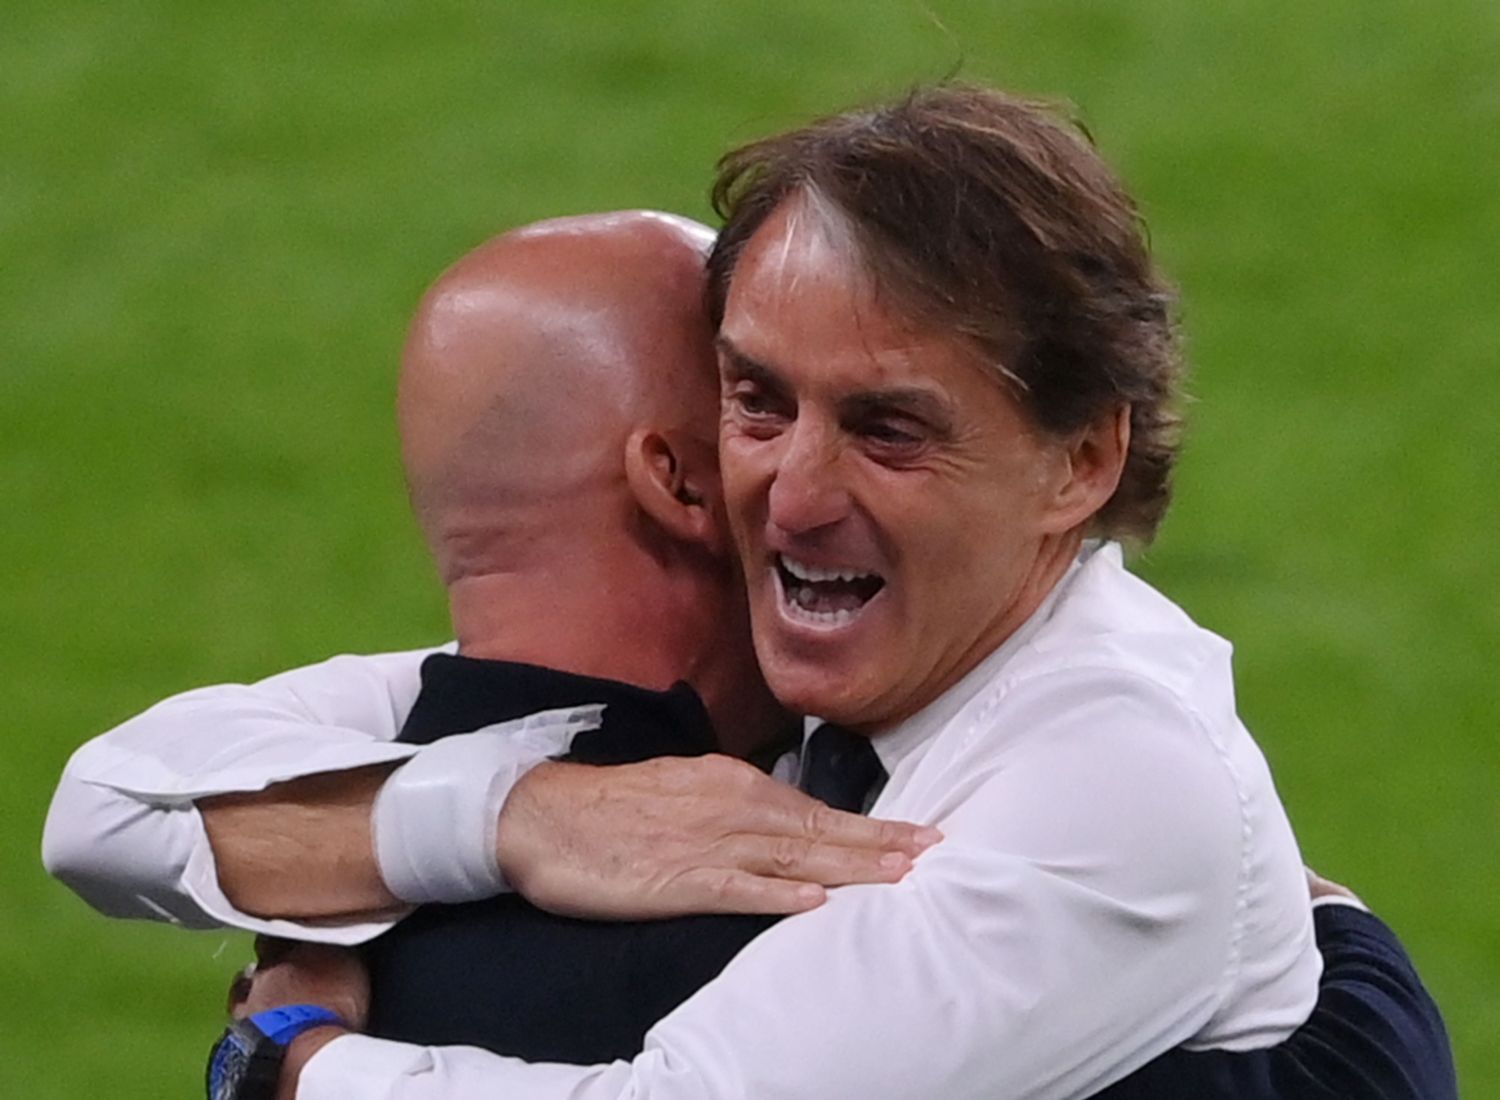 Roberto Mancini recalled his final chat with Gianluca Vialli, with whom he shared time in his playing days at Sampdoria and then on the Azzurri bench.